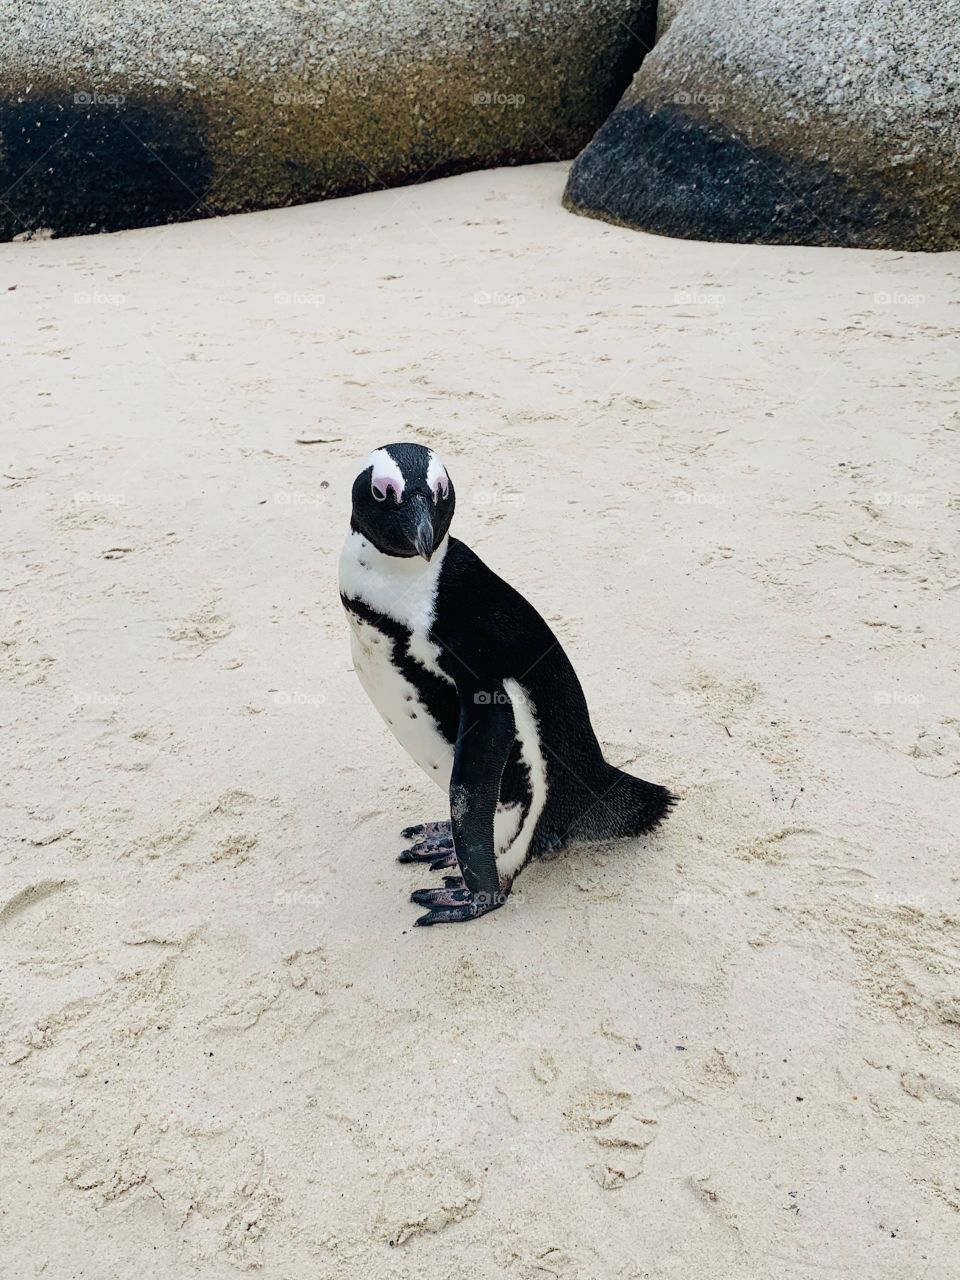 Penguins be like ‘there’s a dress code on this beach, we wear tuxes here’. 